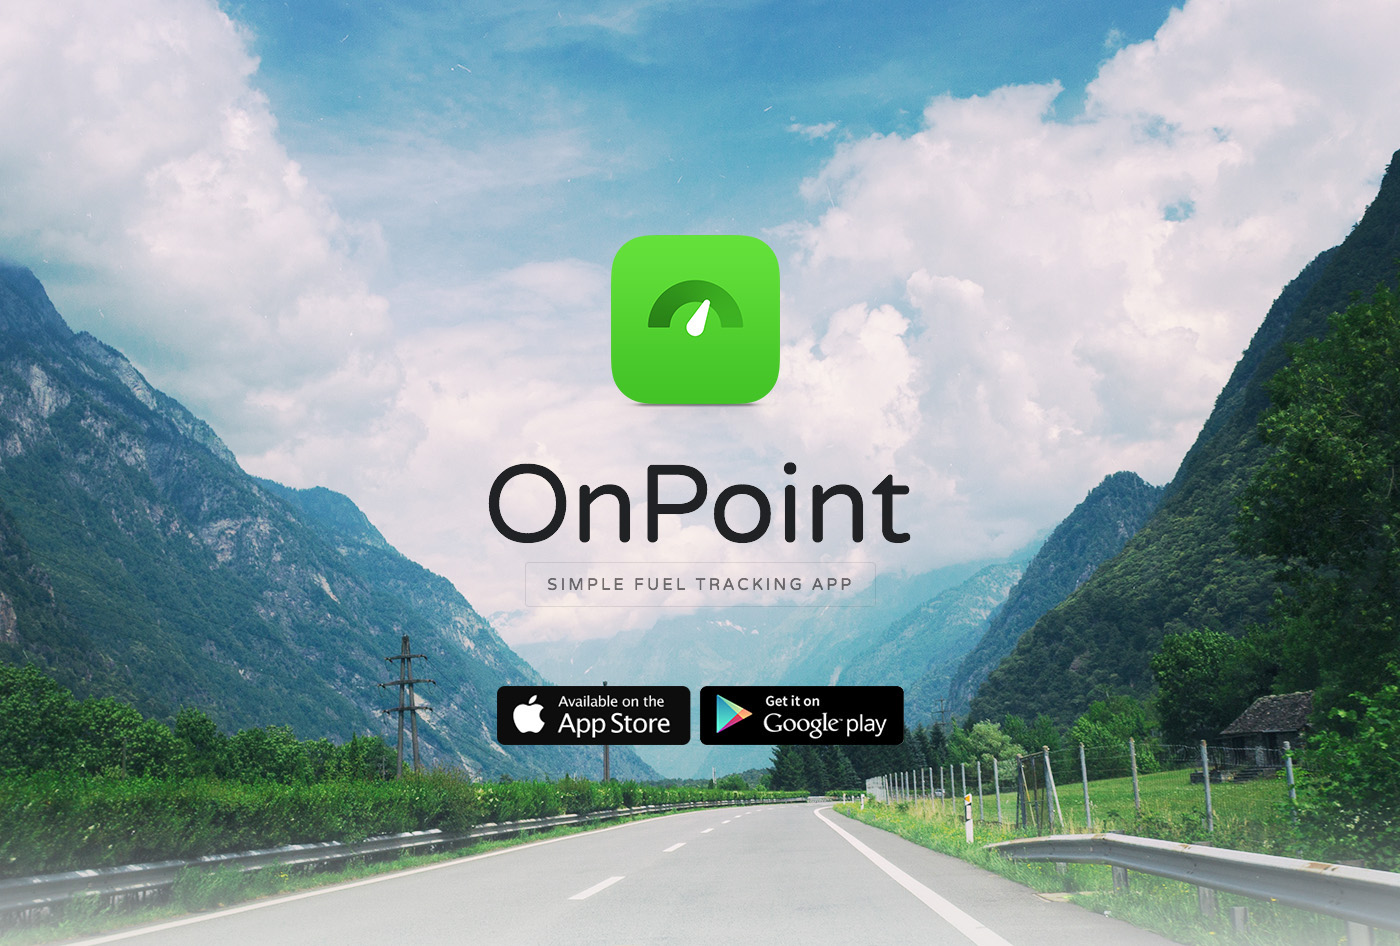 app iphone ios application mobile UI animations interaction Ortyl fuel tracking eco